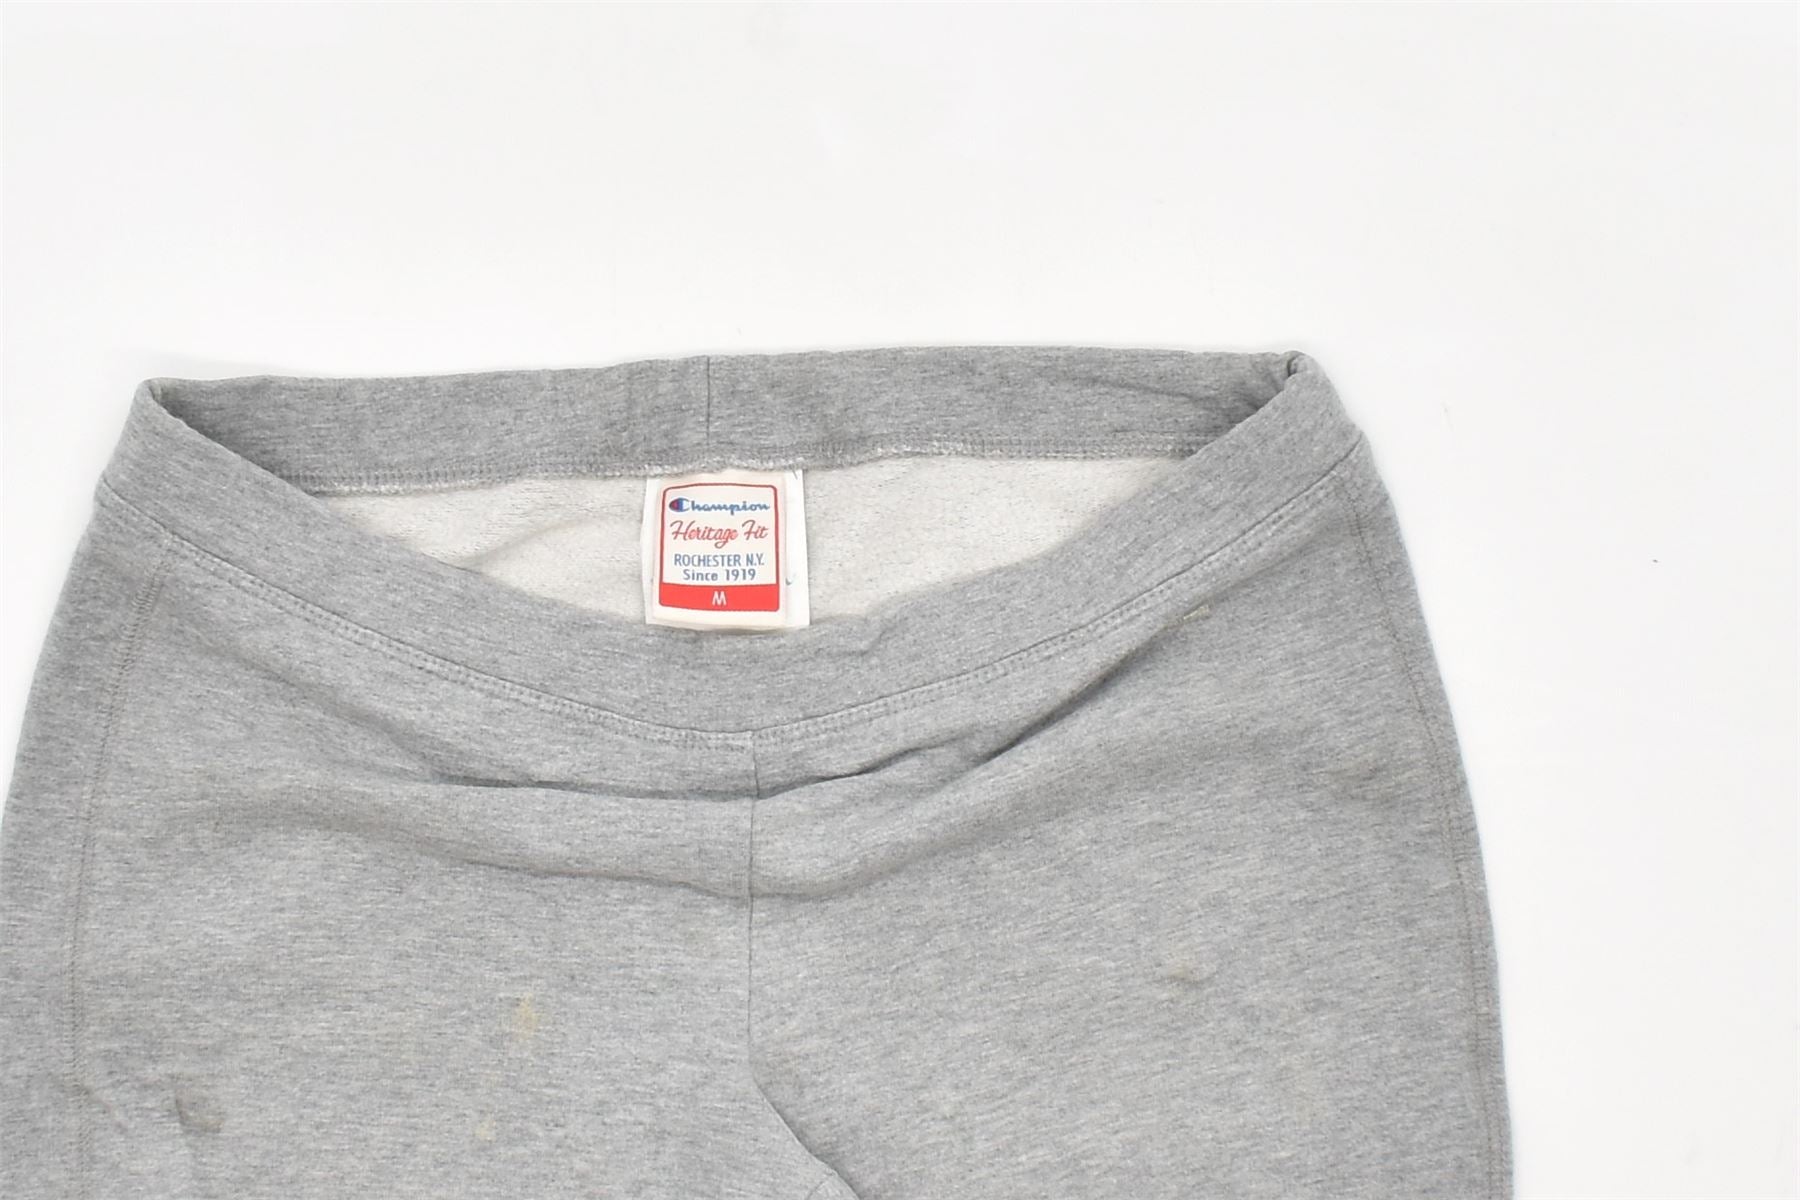 CHAMPION Womens Heritage Fit Leggings UK 10 Small Grey, Vintage &  Second-Hand Clothing Online